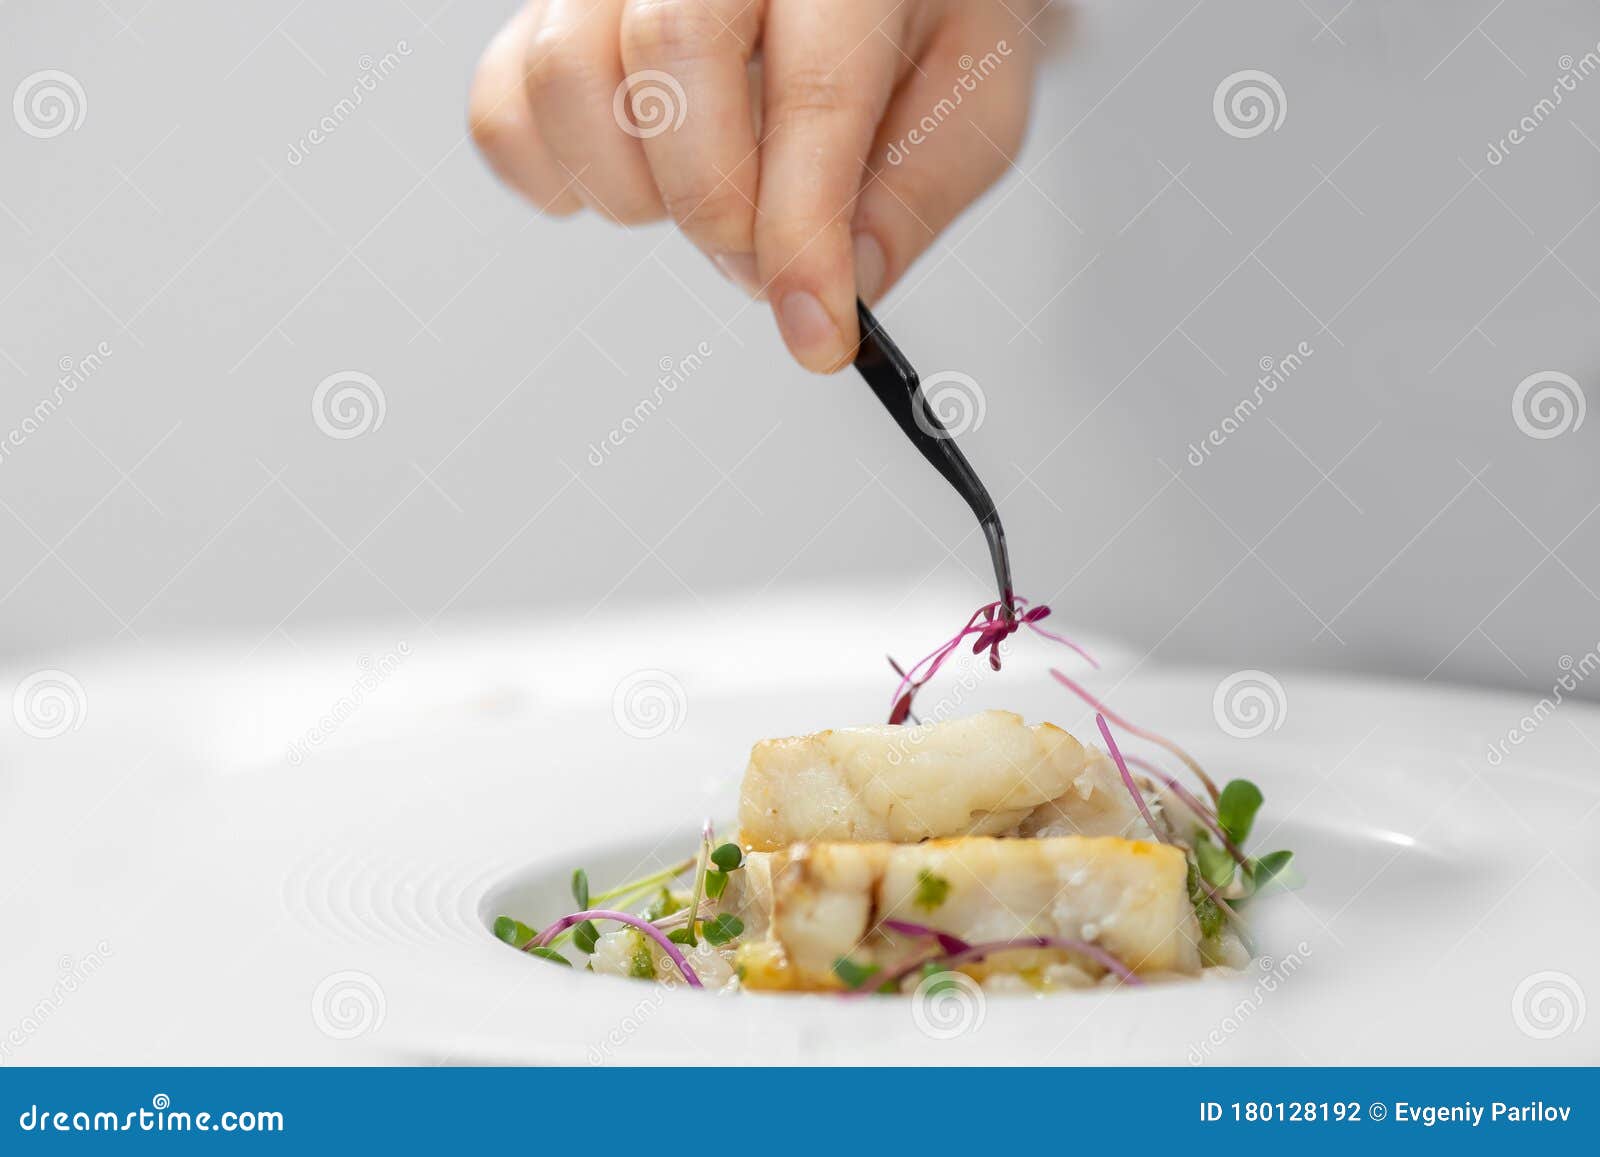 Why Do Some Chefs Plate Meals With Tweezers?